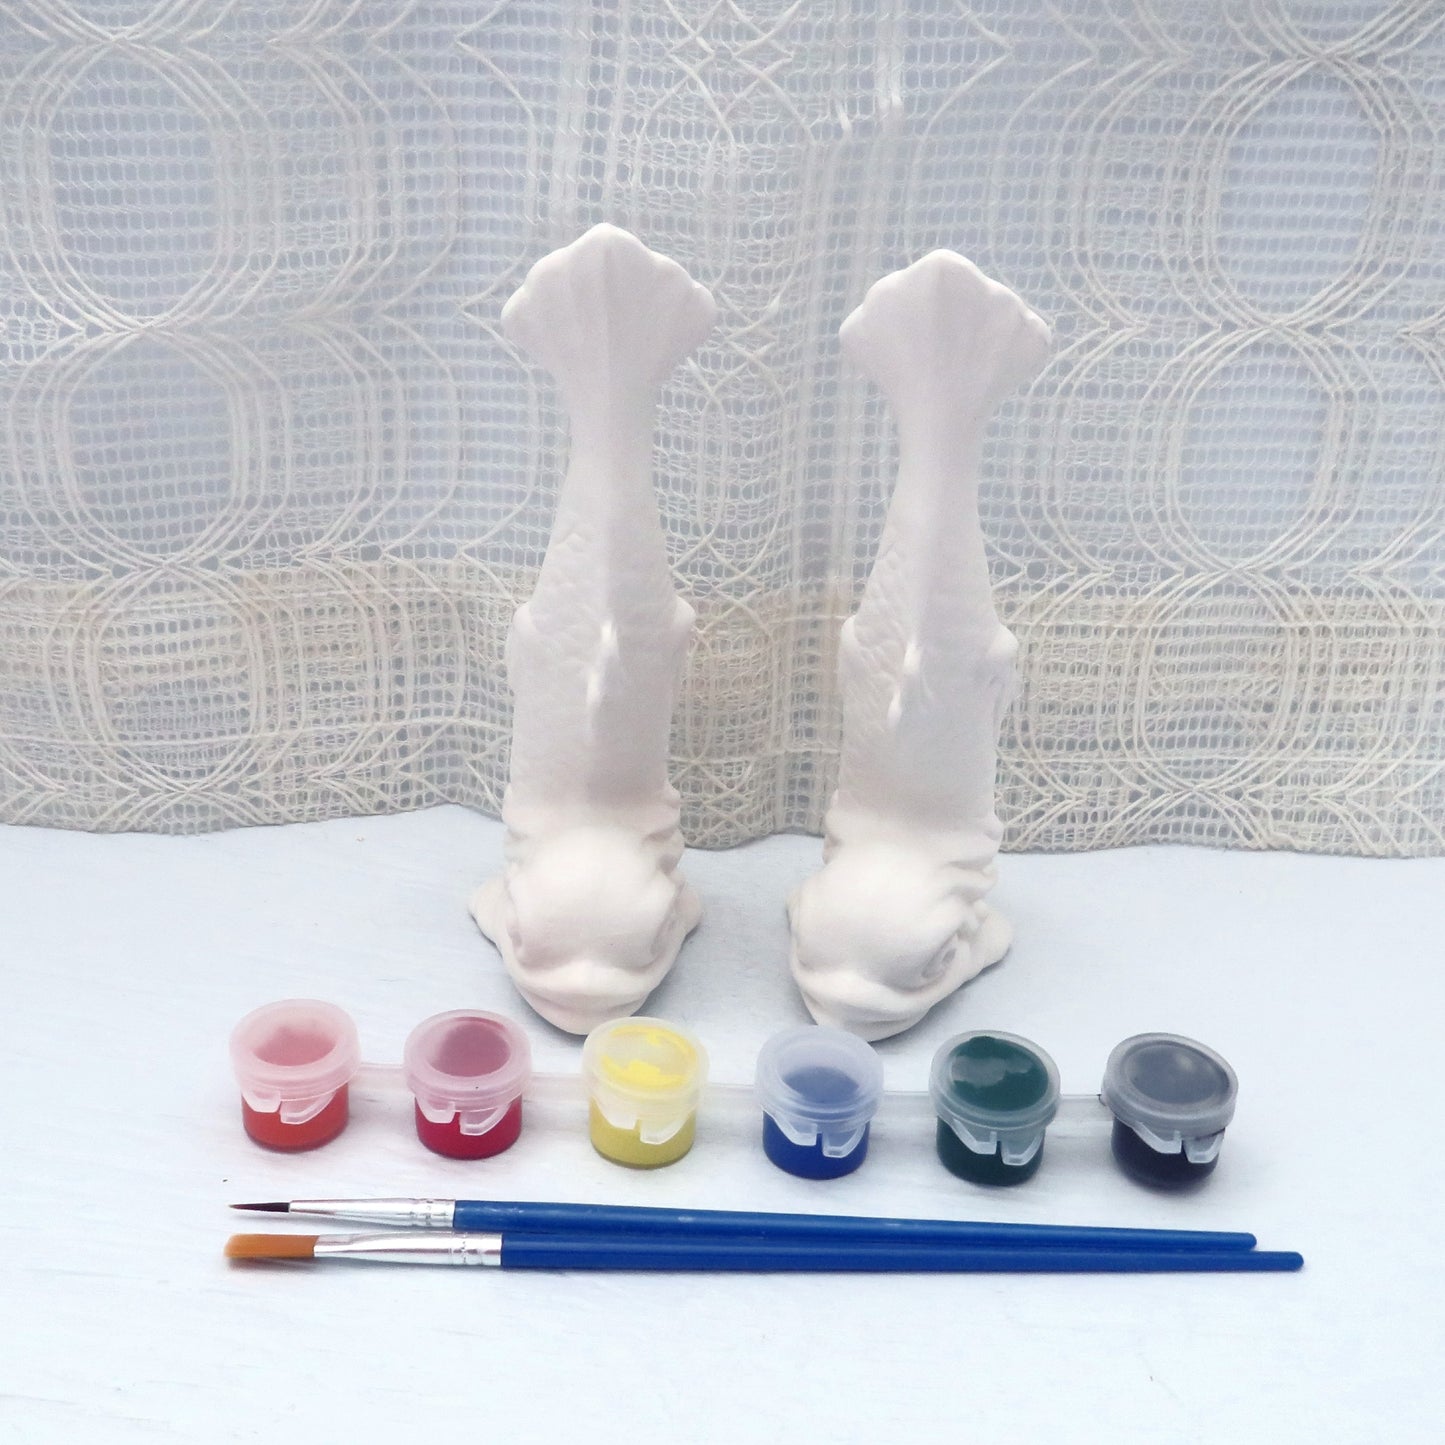 set of 2 ready to paint ceramic fish figurines with their tails up sitting on a pale blue table with an ecru lacy curtain behind them.  There is a set of 6 acrylic paints and 2 paint brushes in front of them.